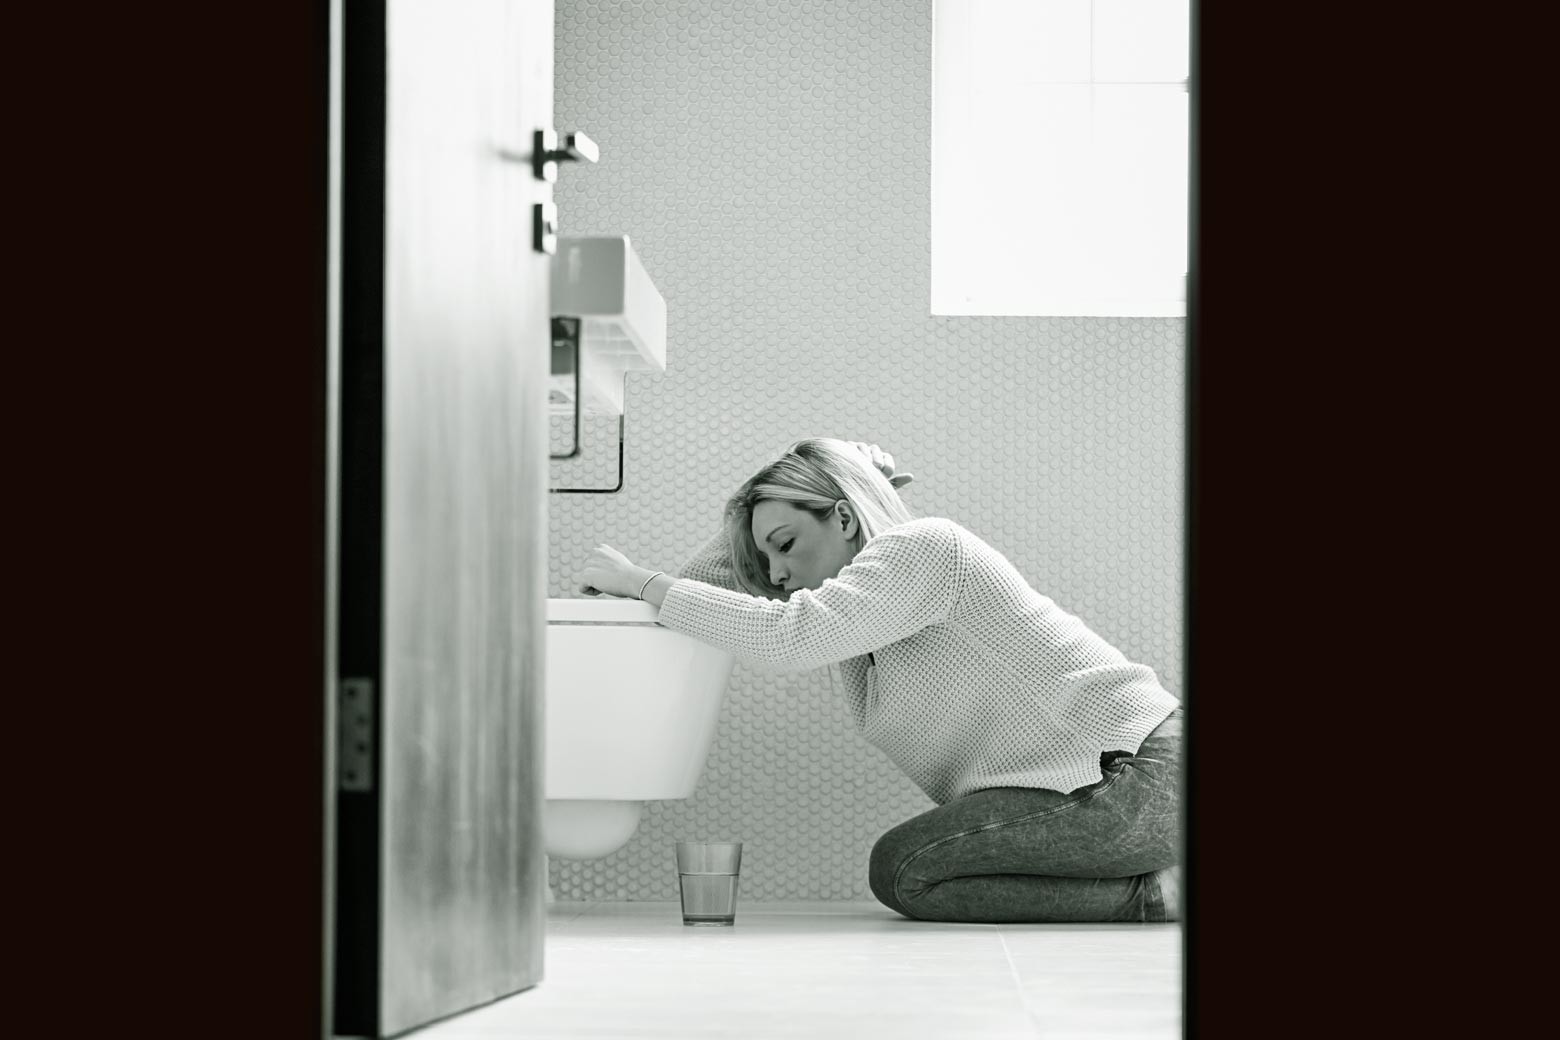 A woman kneels over the toilet in misery.